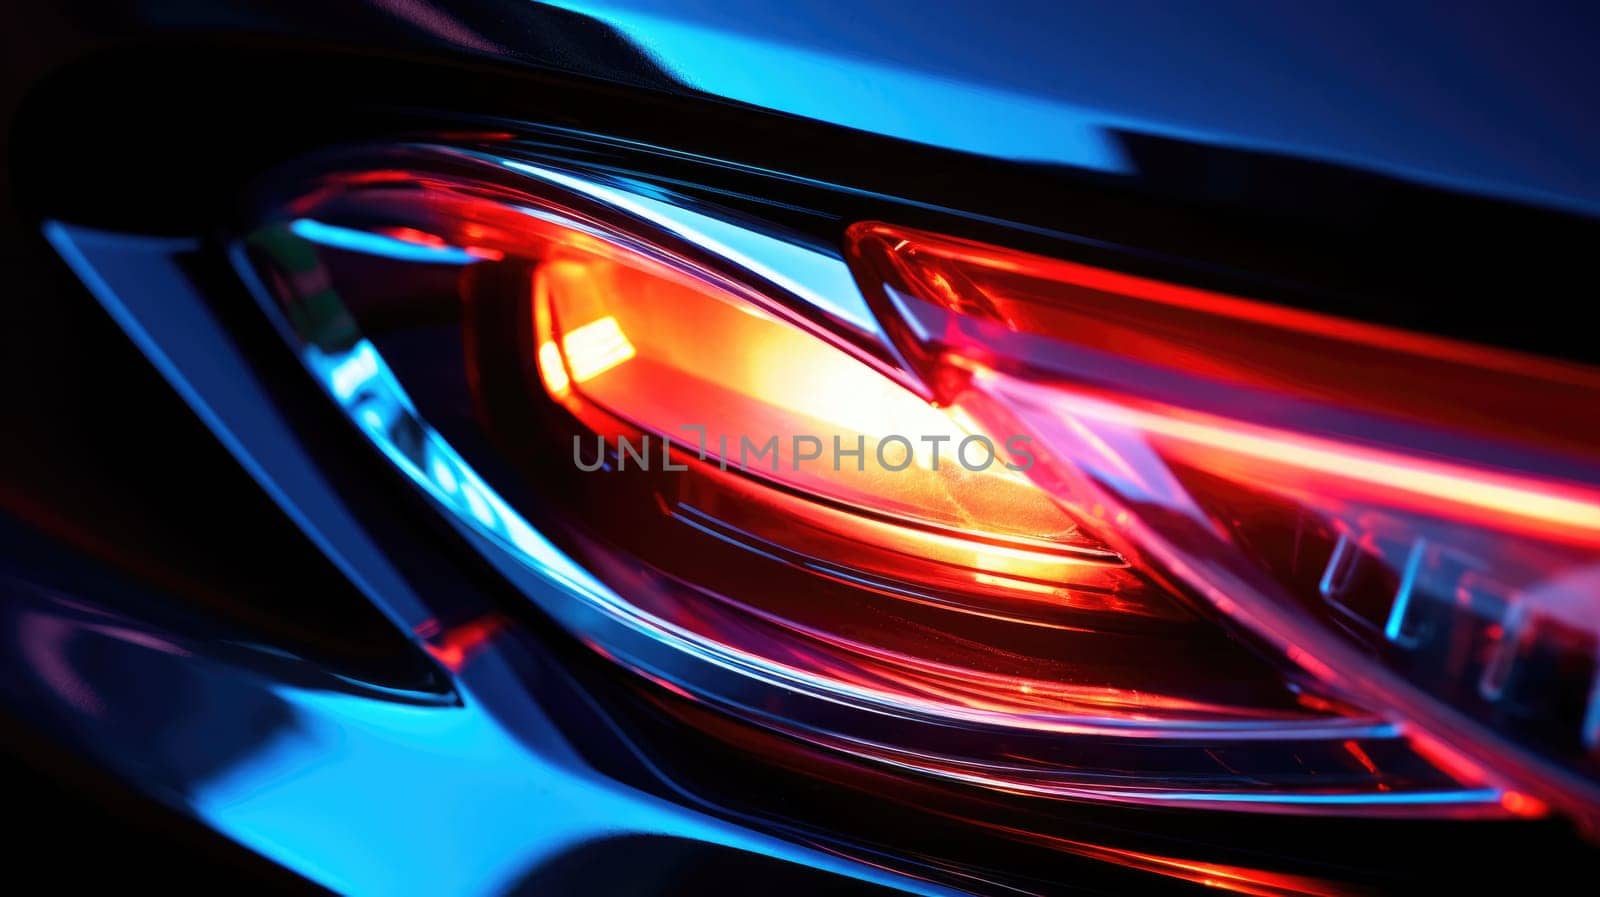 Car headlights with light rays banner. Car headlight close up. Neon background by natali_brill